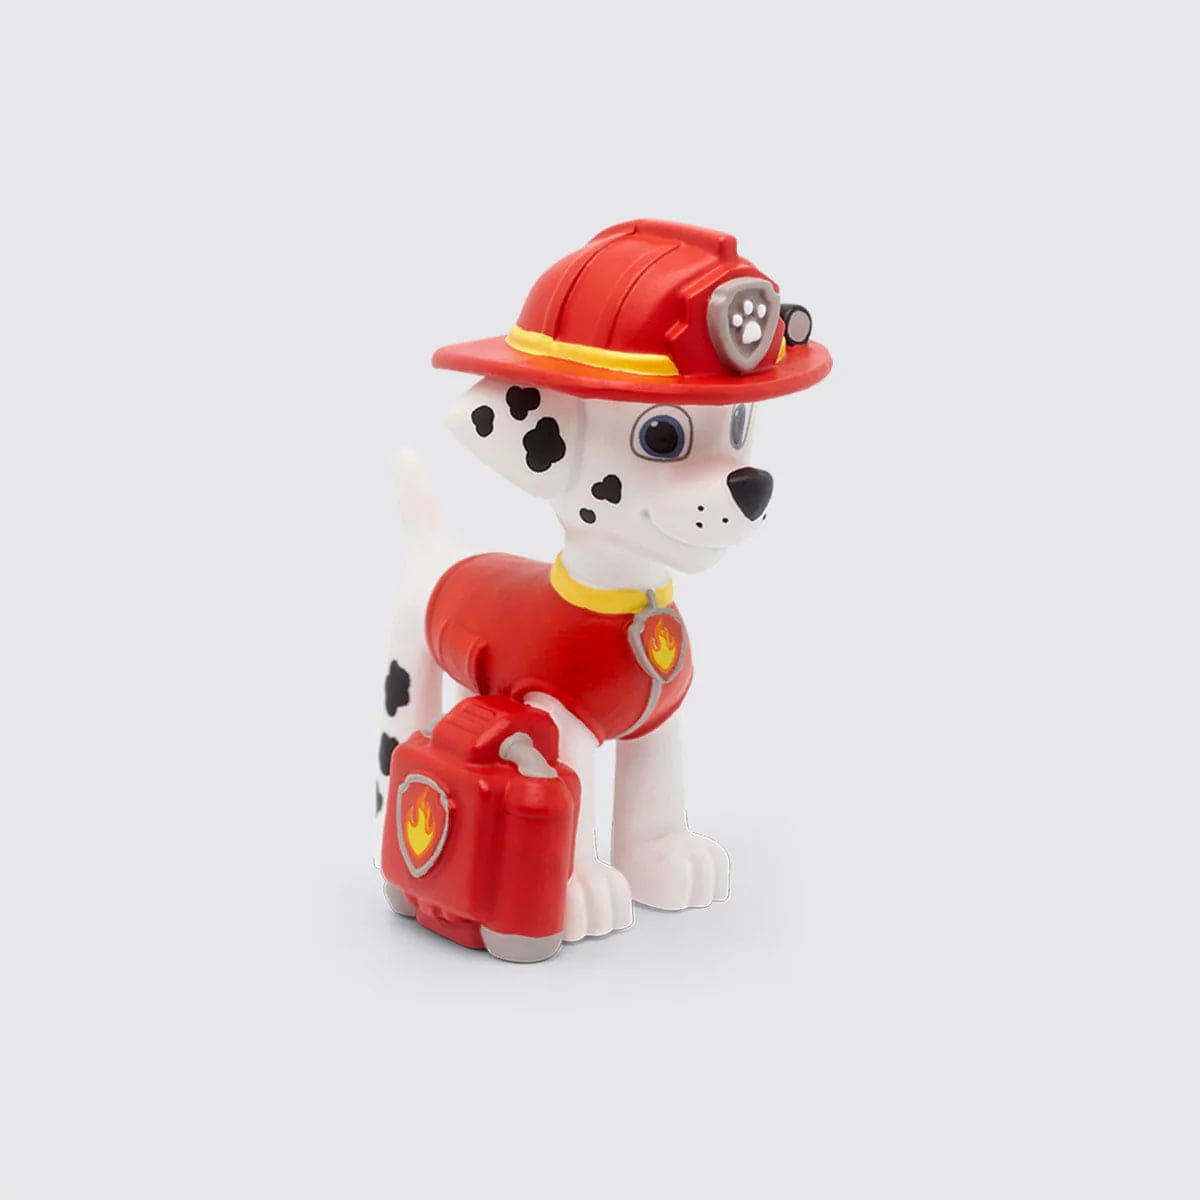  Tonies Liberty Audio Play Character from Paw Patrol